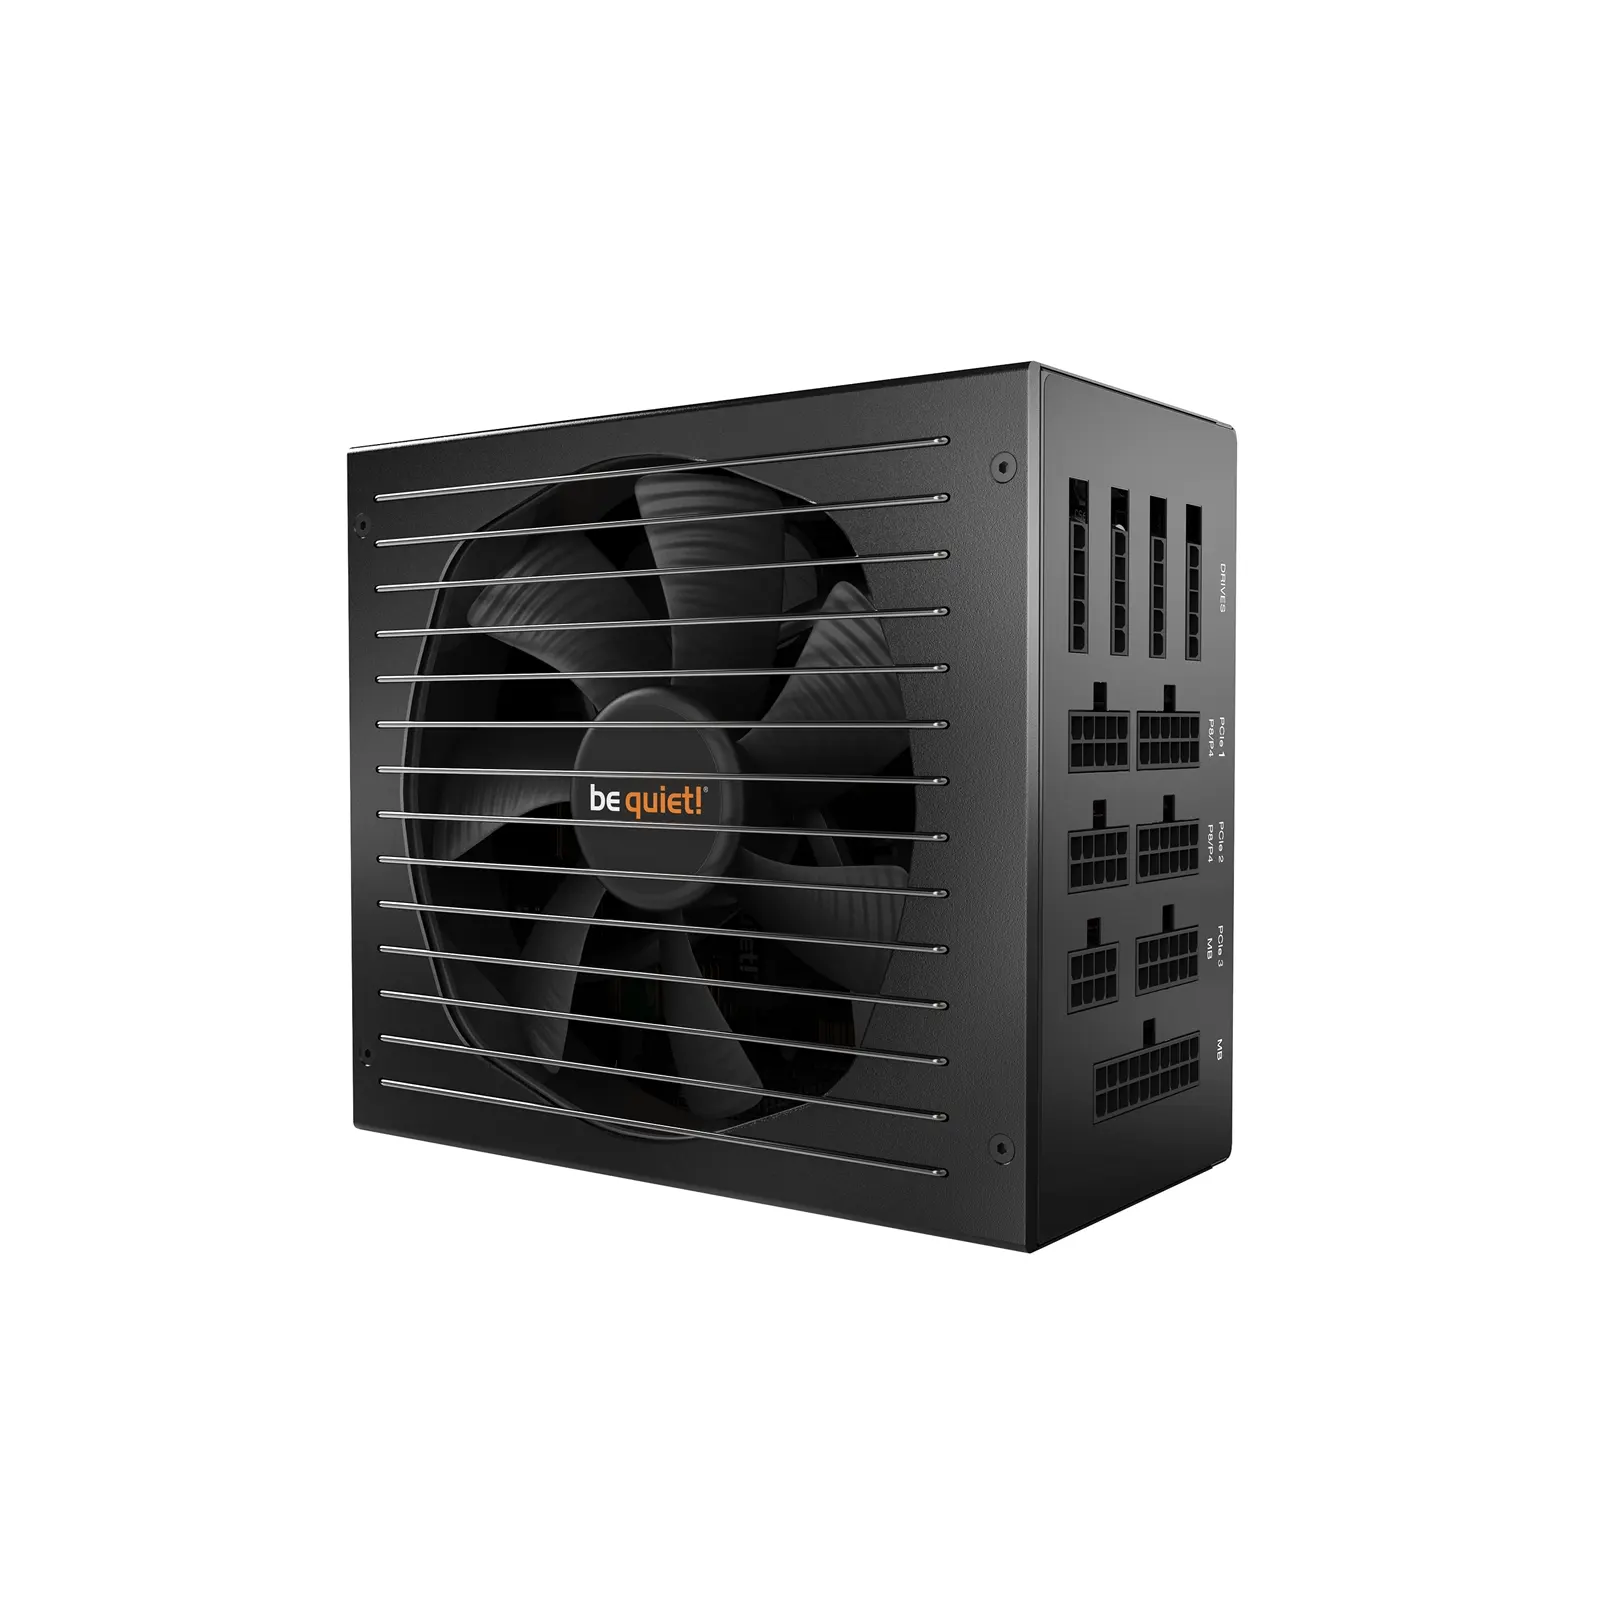 be quiet! Straight Power 11 1200W PSU, 80 PLUS Platinum, Virtually Inaudible Silent Wings 3 Fan, 6 PCIe Connectors, 5 Year Warranty